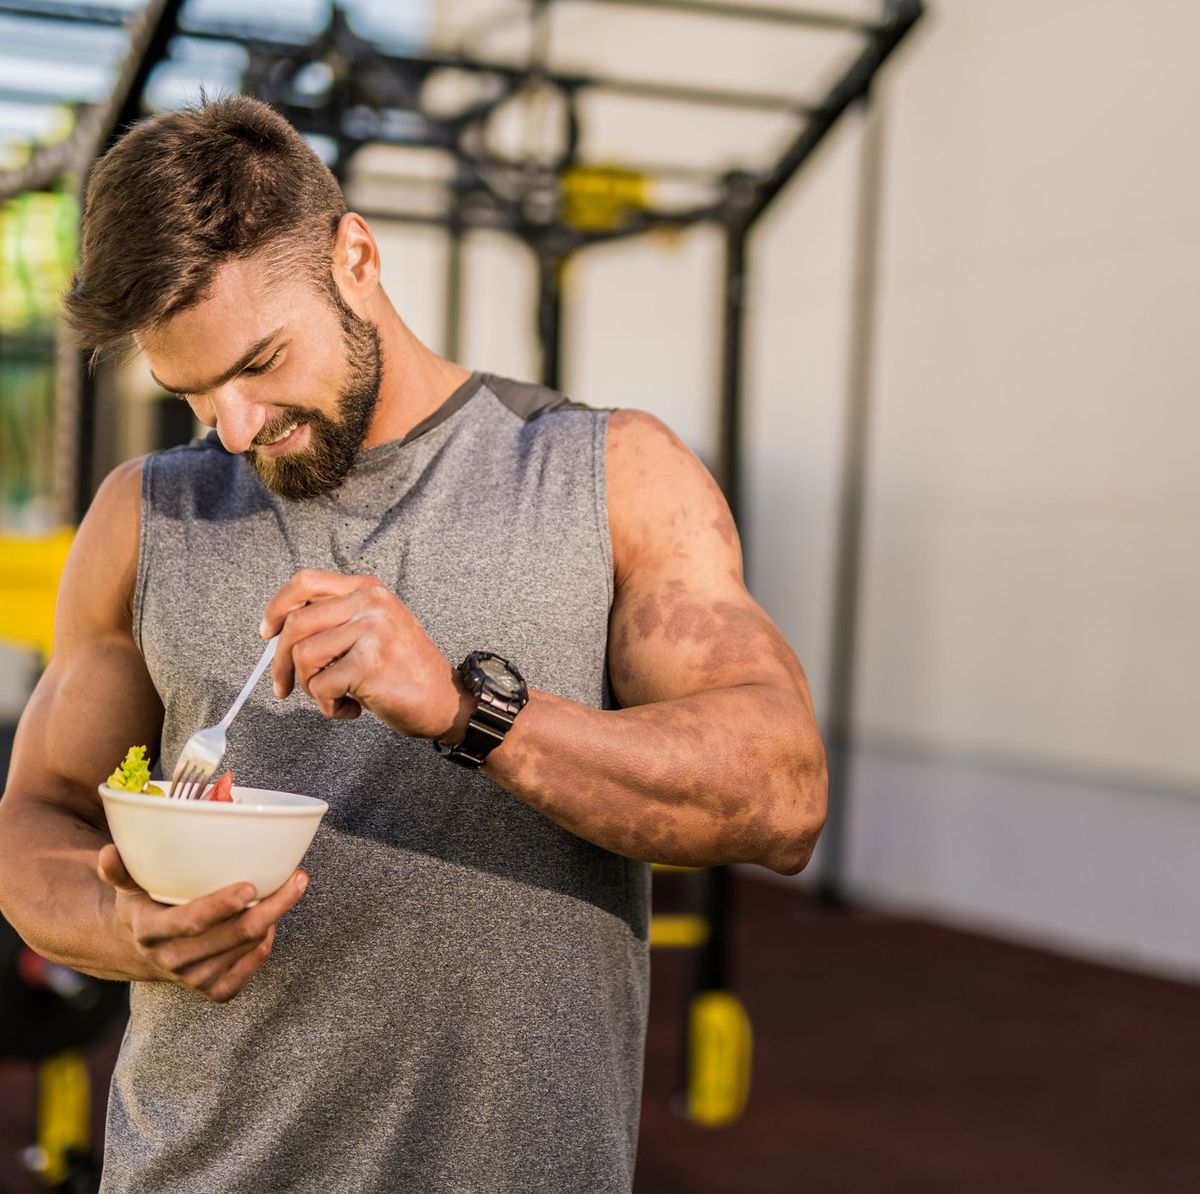 fit person eating pre workout snack